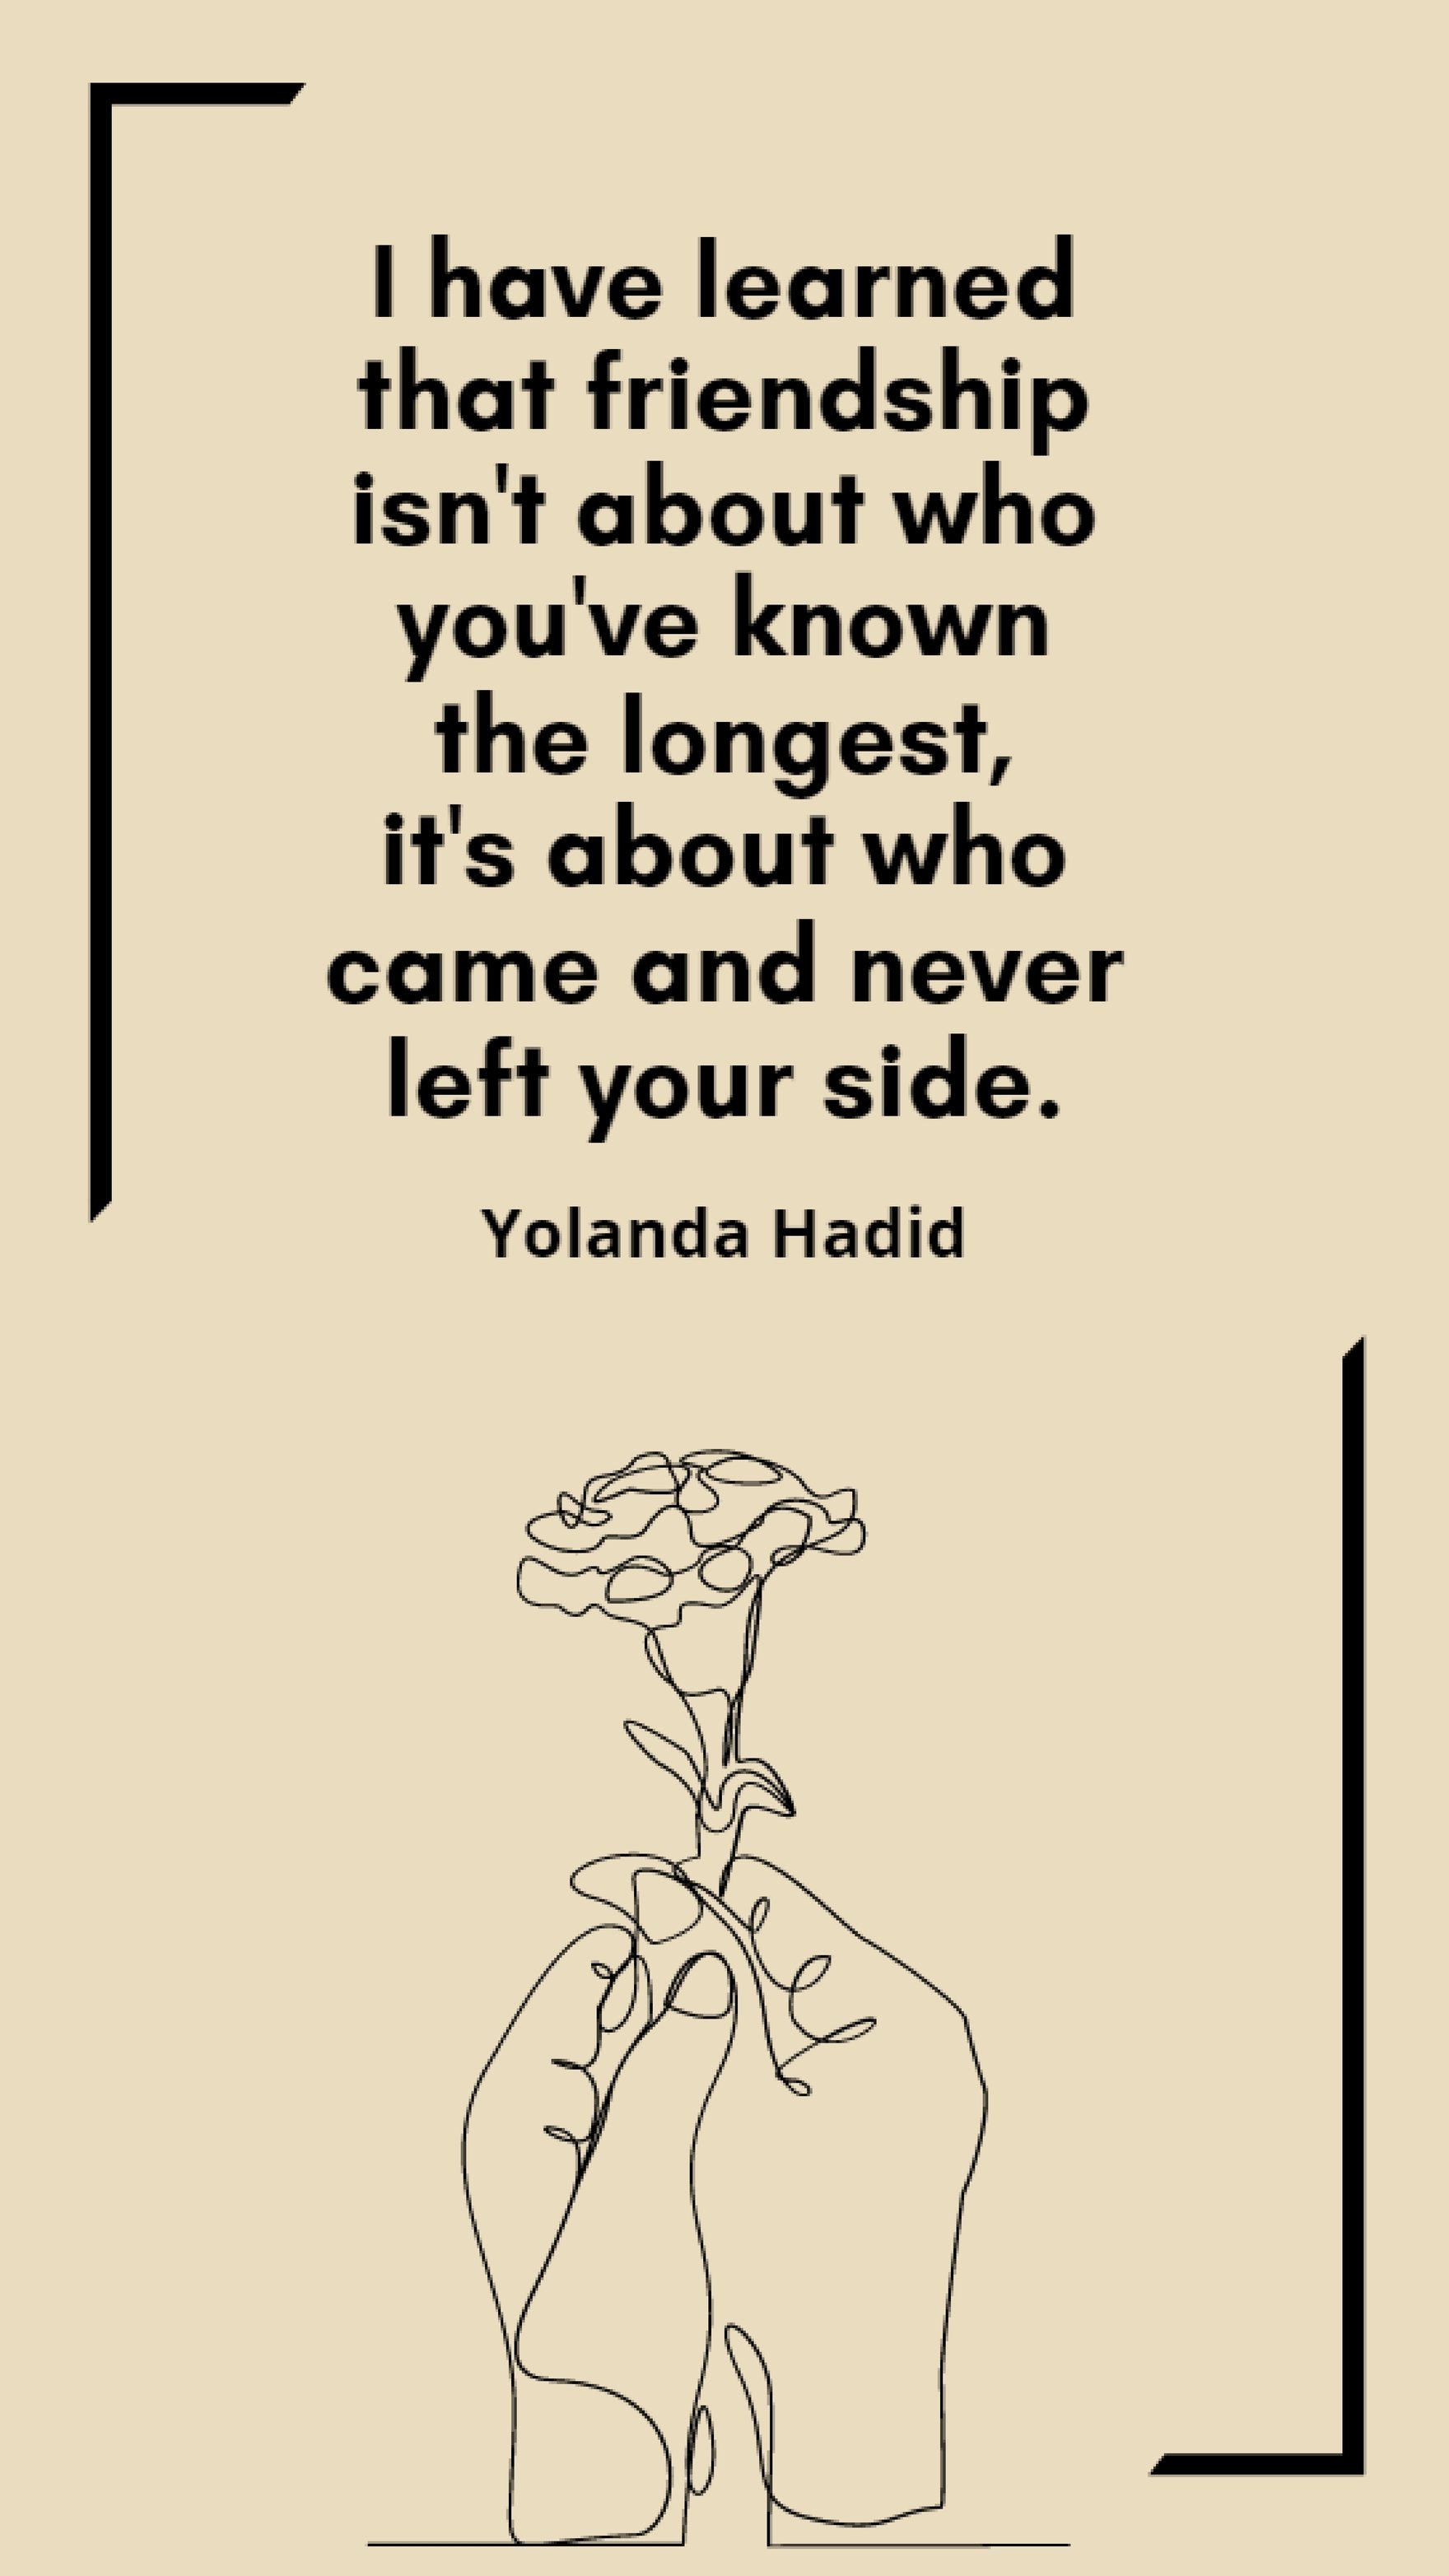 Yolanda Hadid - I have learned that friendship isn't about who you've known the longest, it's about who came and never left your side. Template